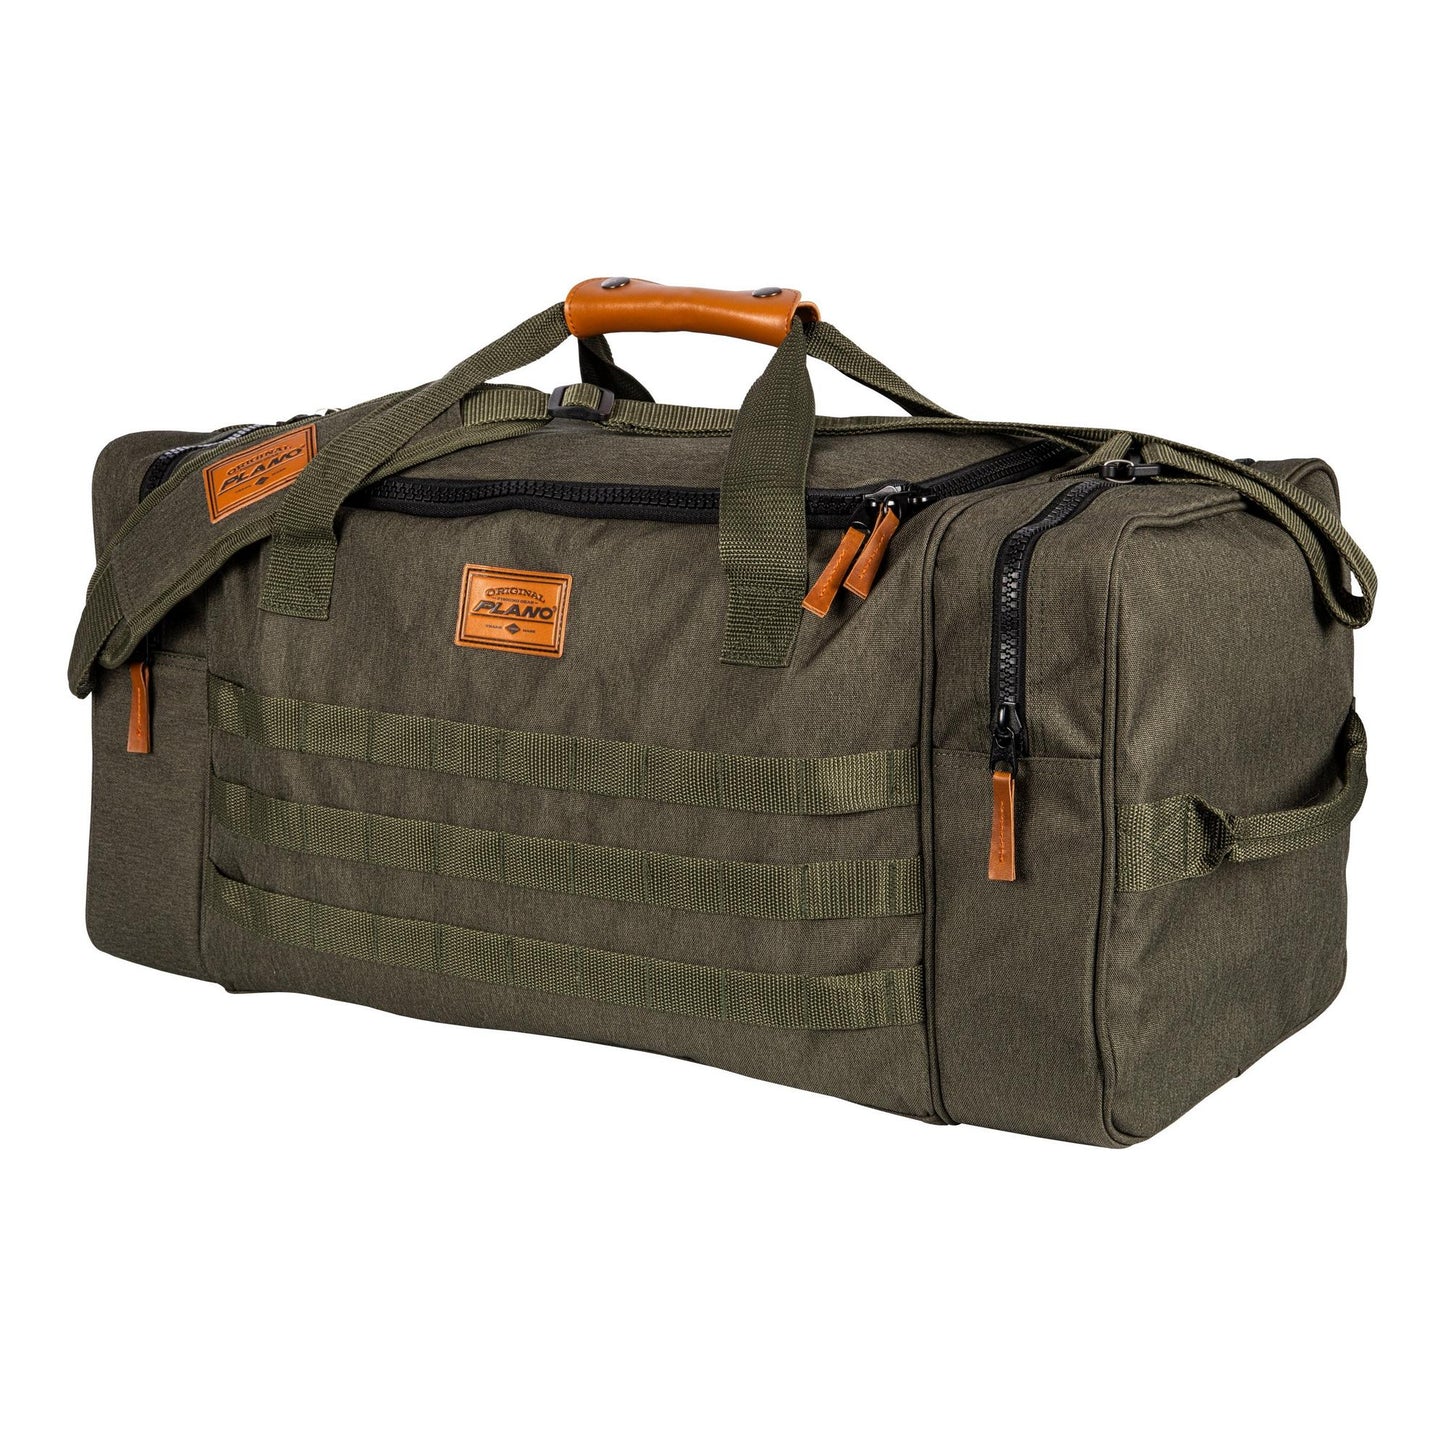 Plano Series A Tackle Duffle